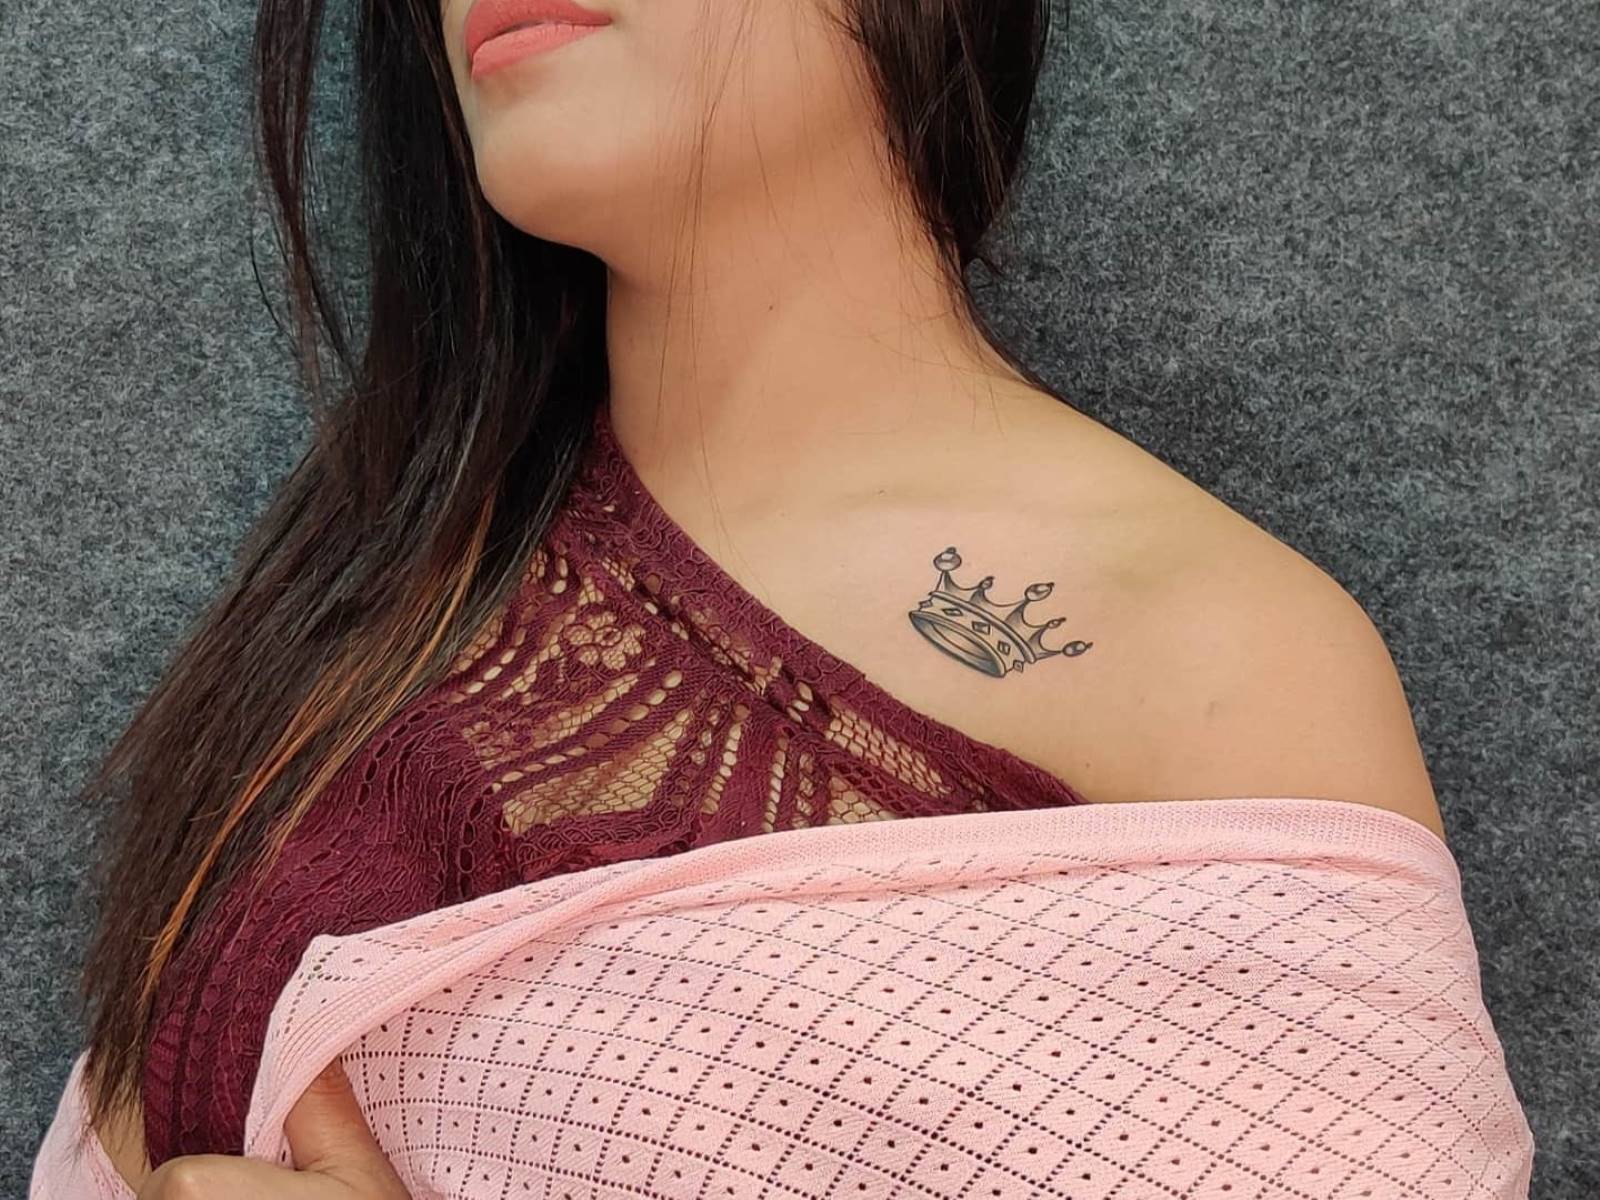 The Hidden Meaning Behind A Girl’s Shoulder Crown Tattoo Revealed!